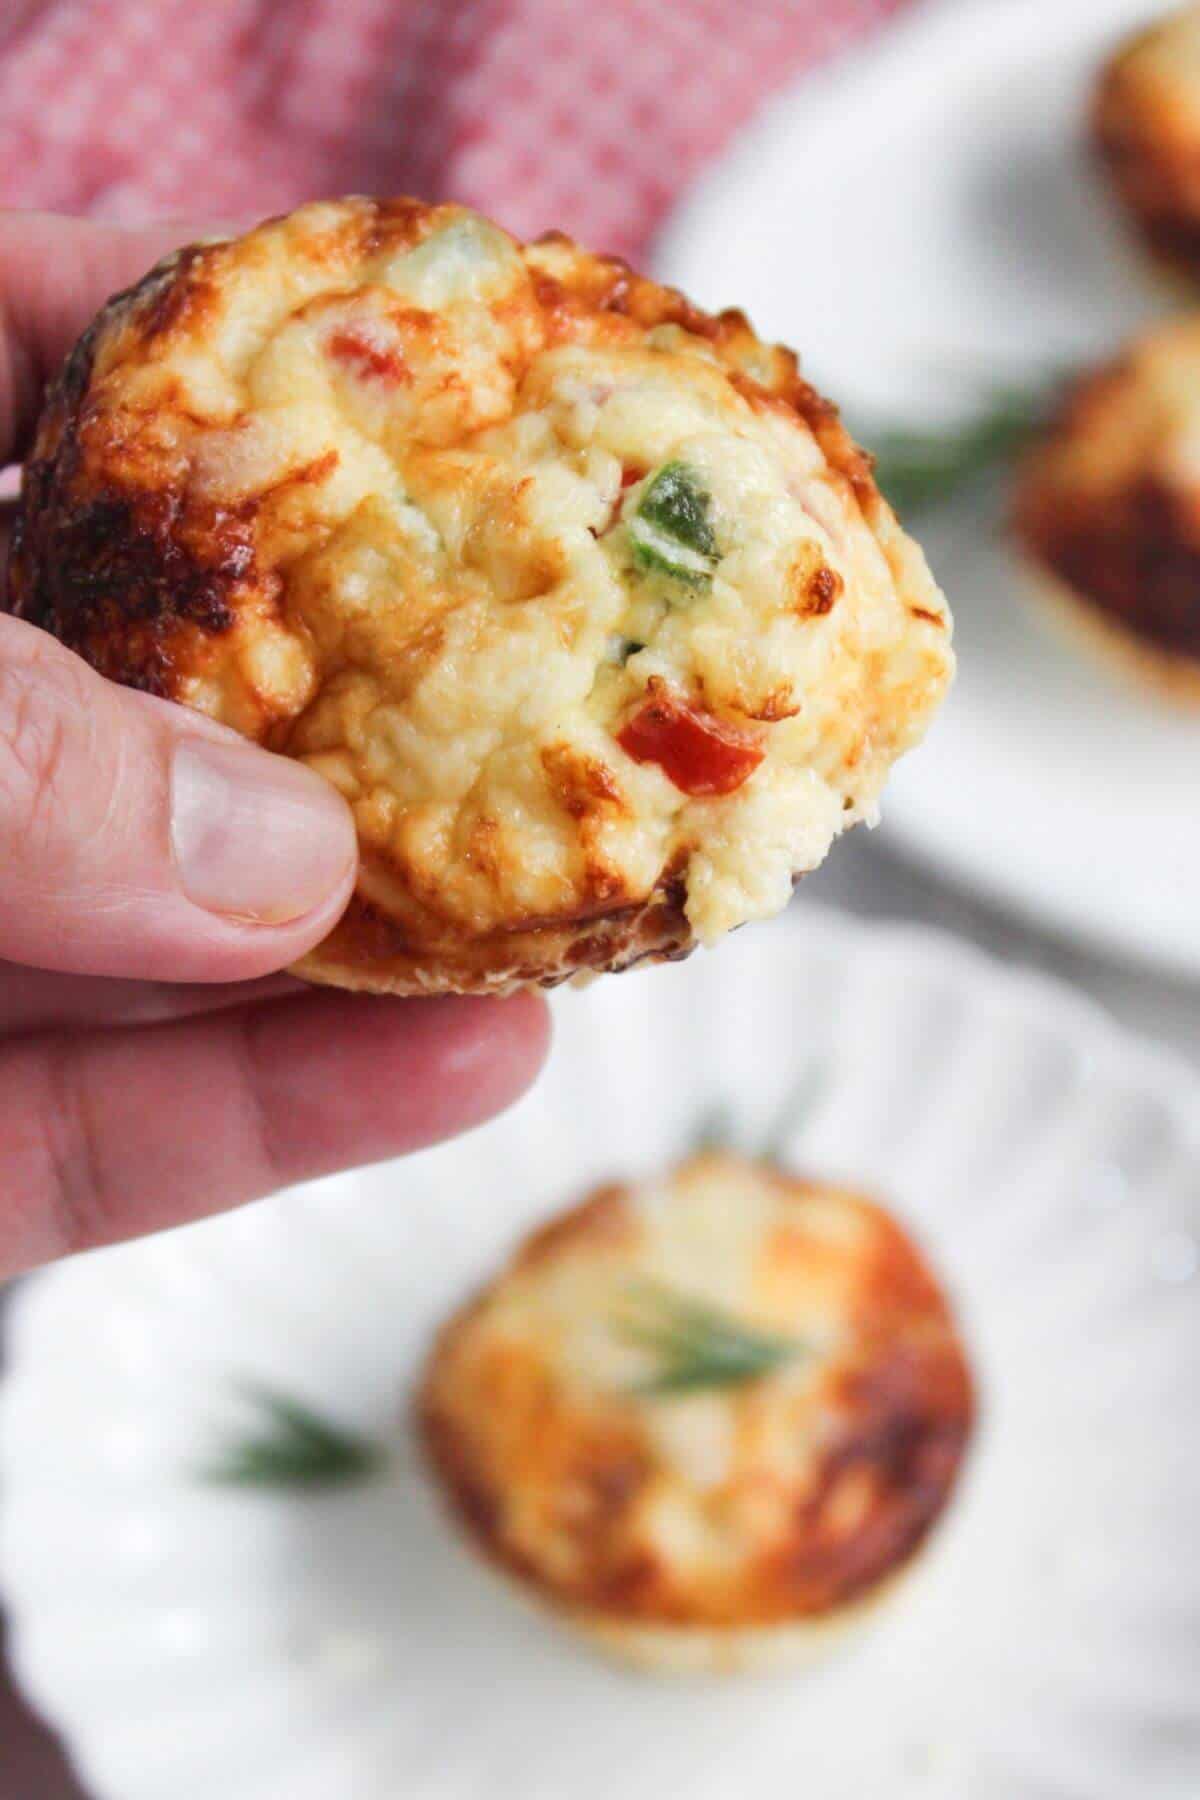 A hand holding a small cheese and vegetable egg white frittata muffin.